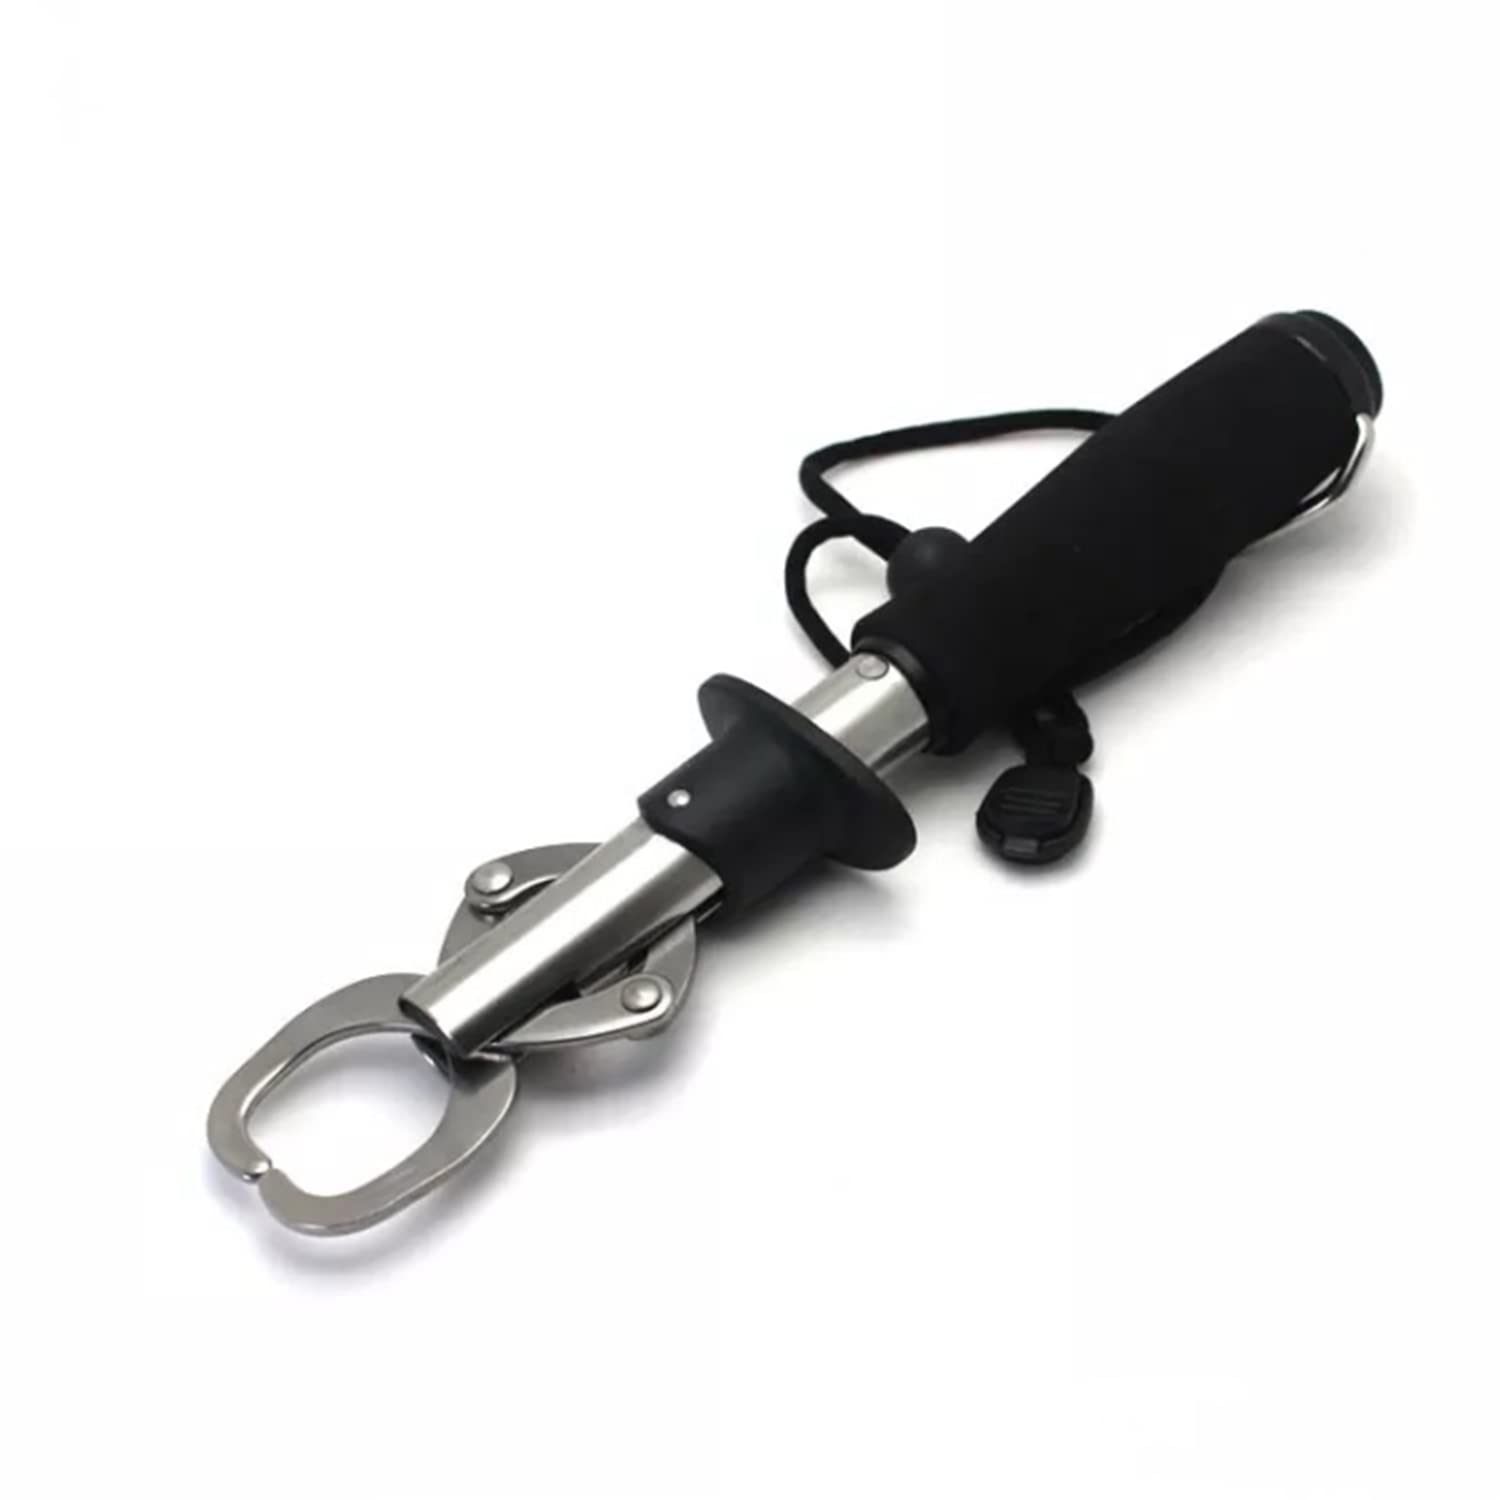 Professional Fish Gripper with Scale Stainless Steel Fish Holder Grabber 33  Pound Fish Lip Grip Boga